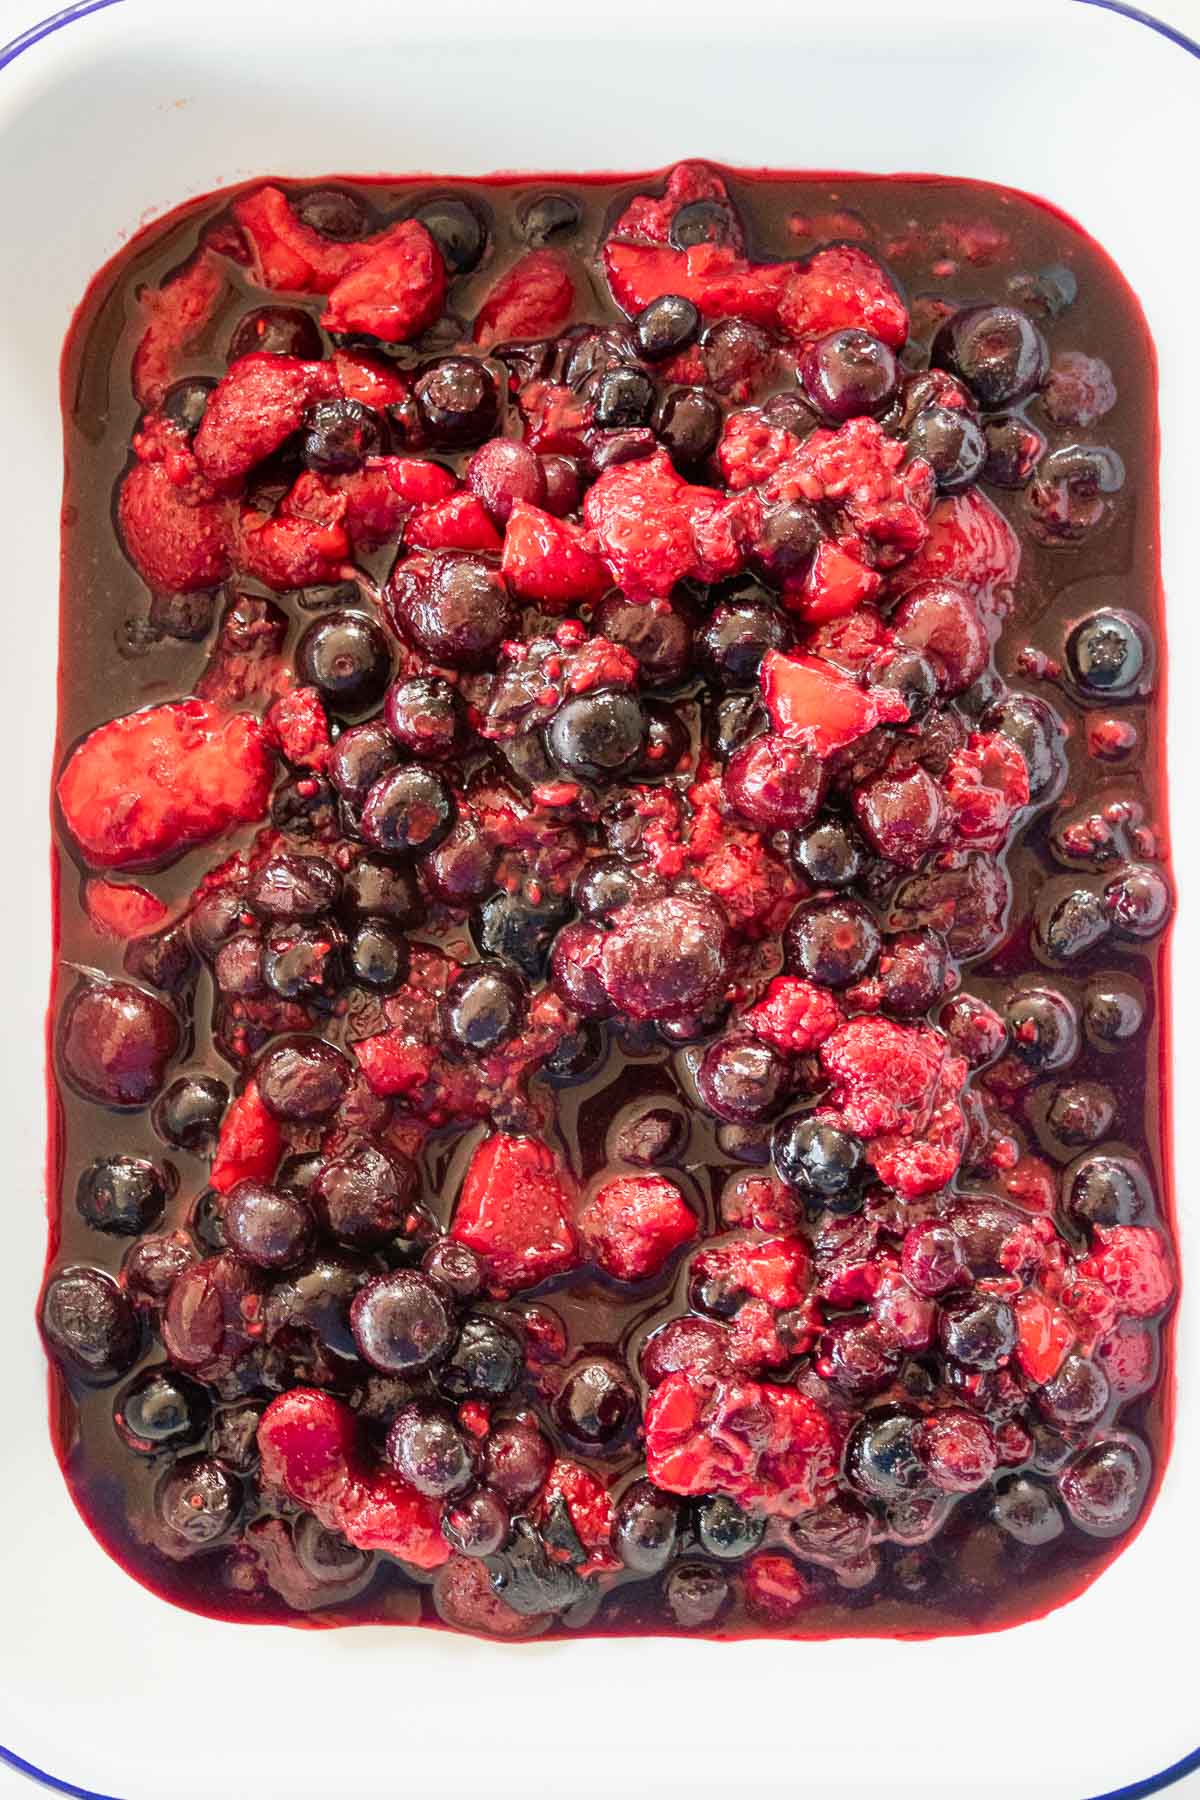 oven dish of mixed berries